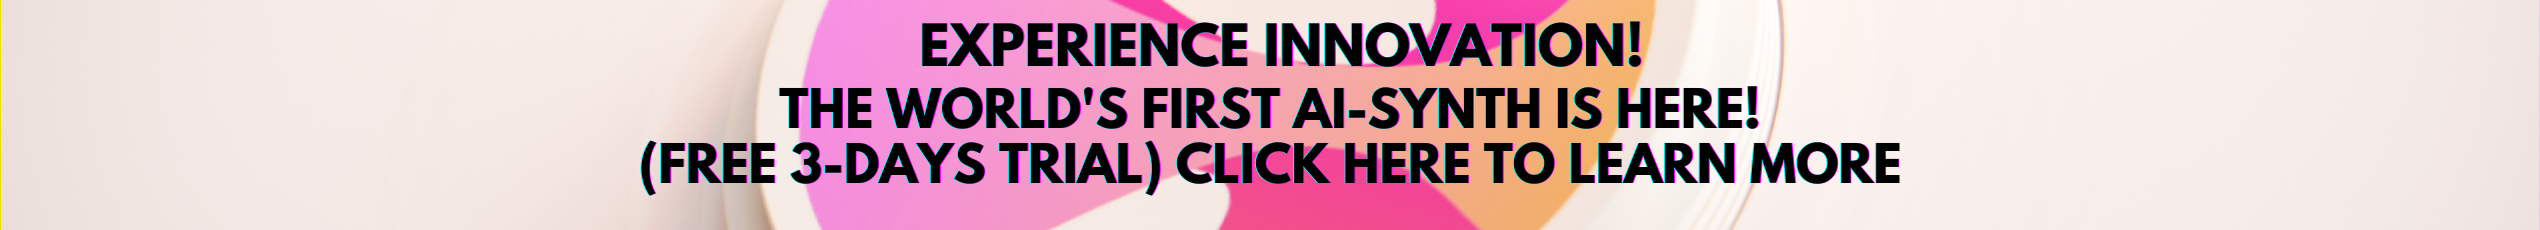 THE FIRST AI-POWERED